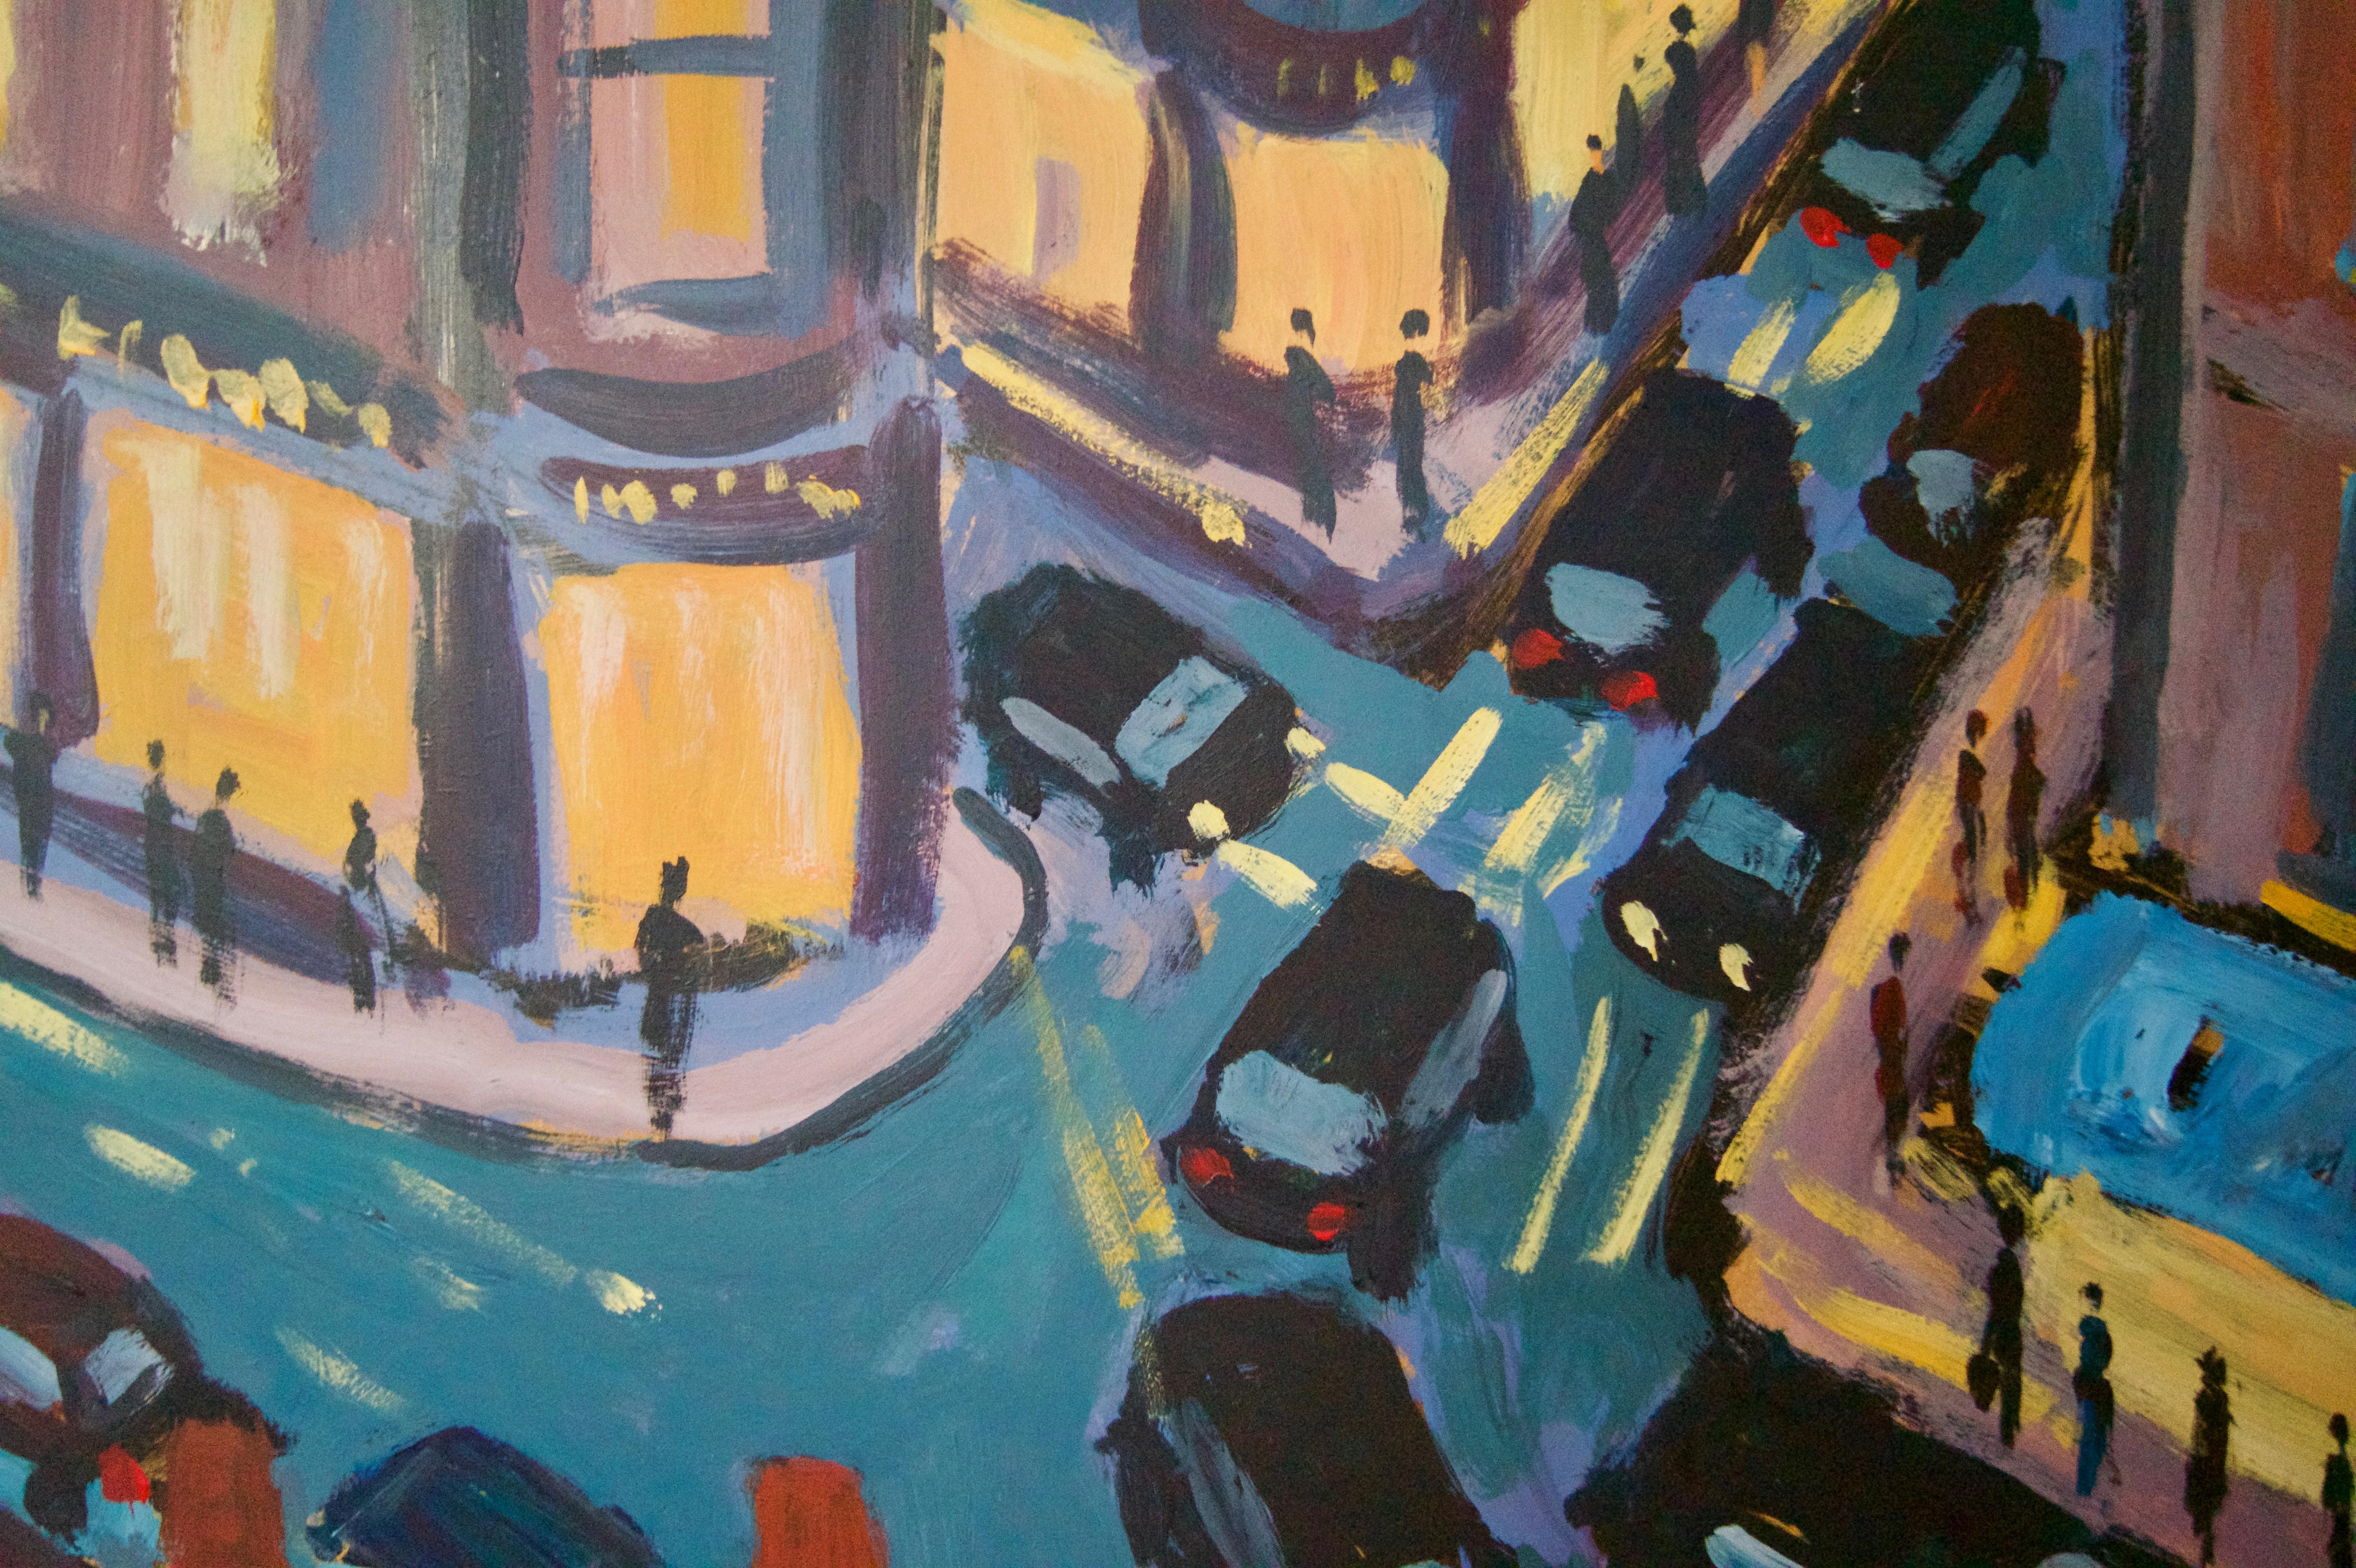 North Kensington - Late 20th Century Impressionist Acrylic Piece London - Quirke - Black Landscape Painting by Michael Quirke